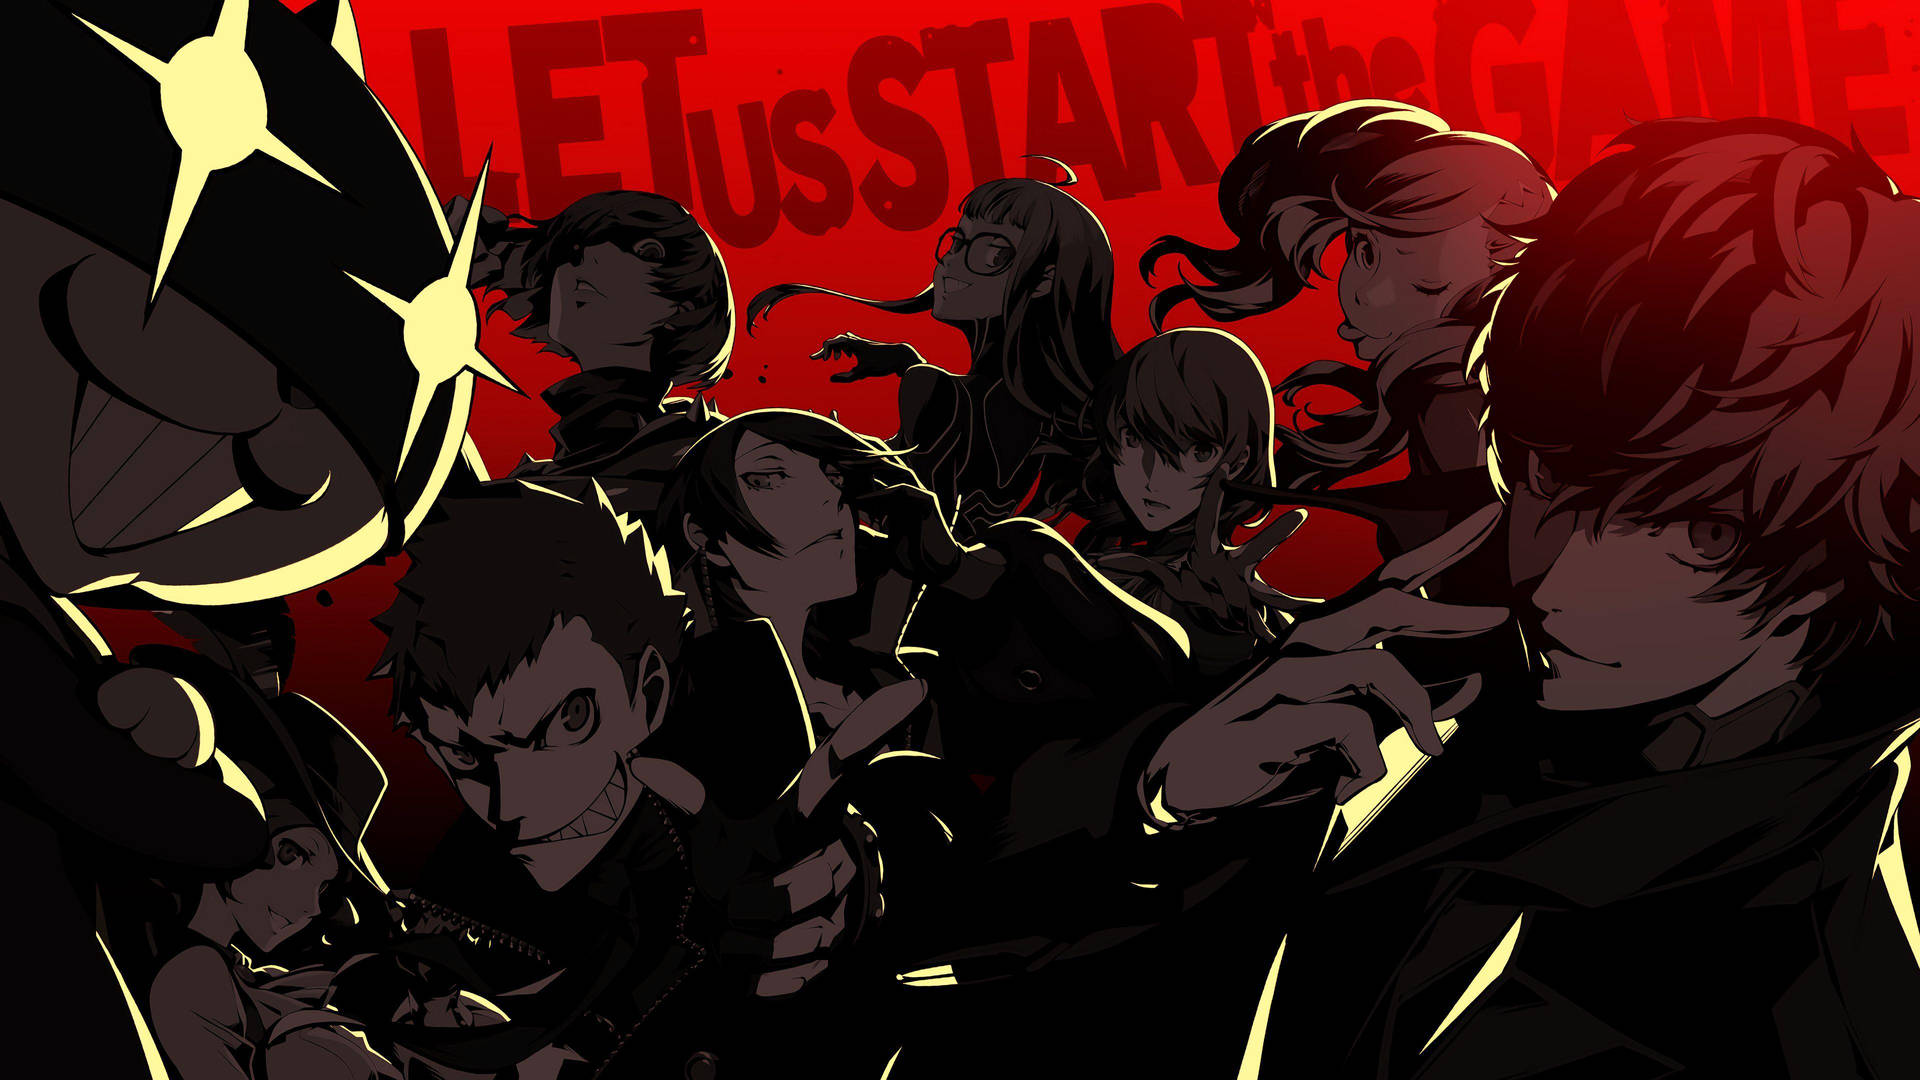 Persona 5 Royal Characters' Silhouettes Background